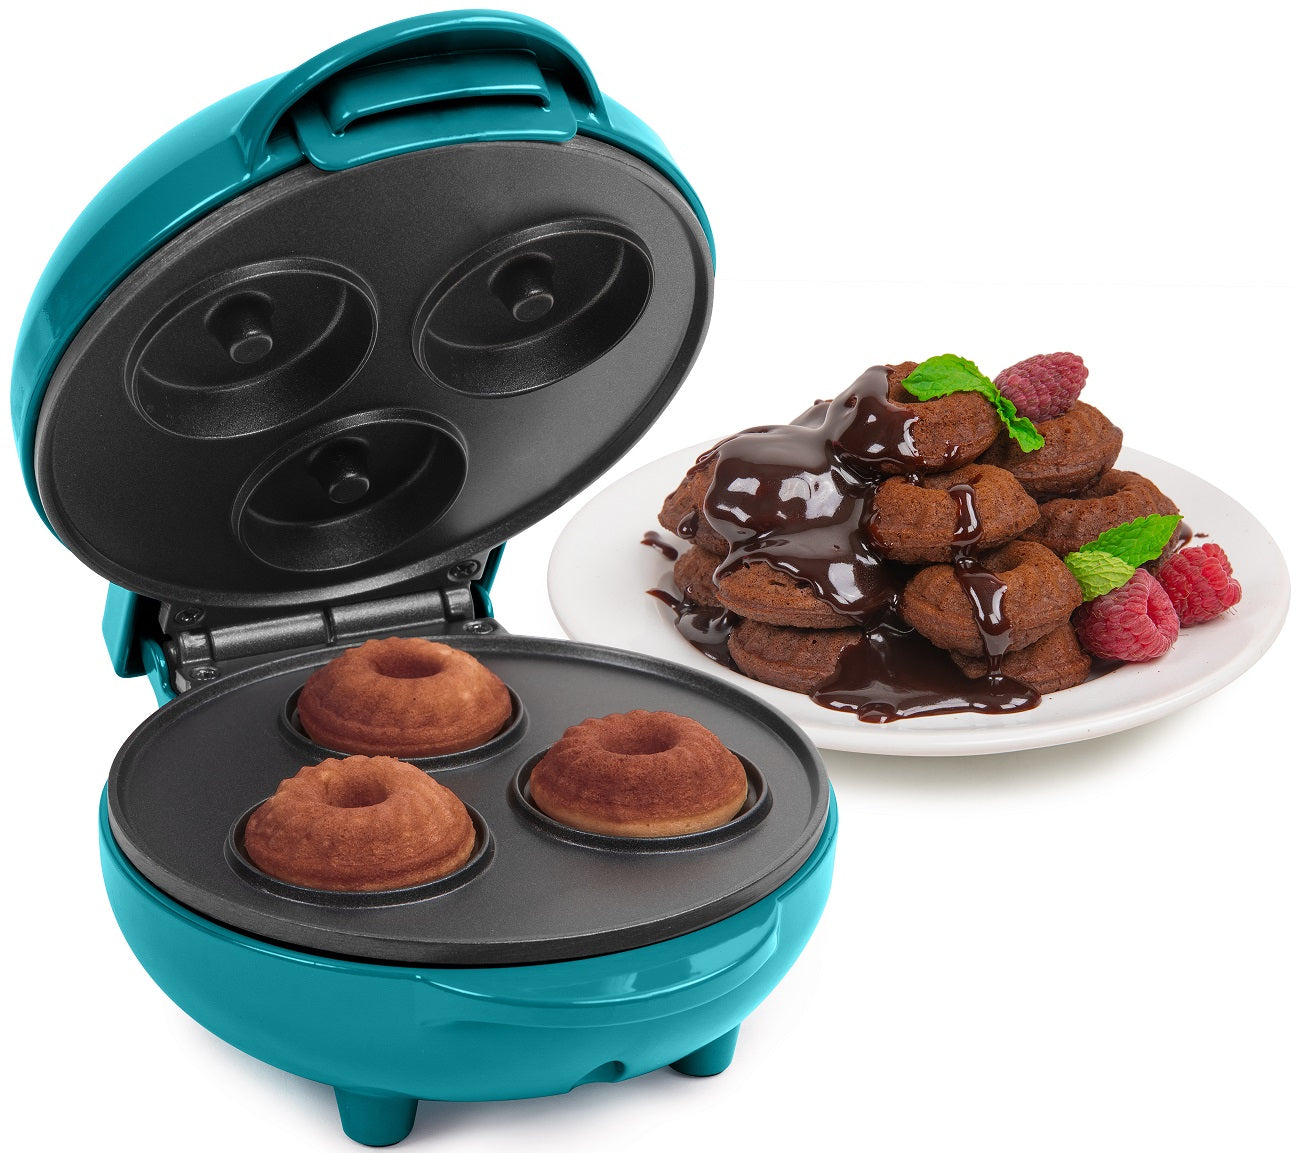 Dash mini Bundt Cake, Waffle And Donut Maker for Sale in